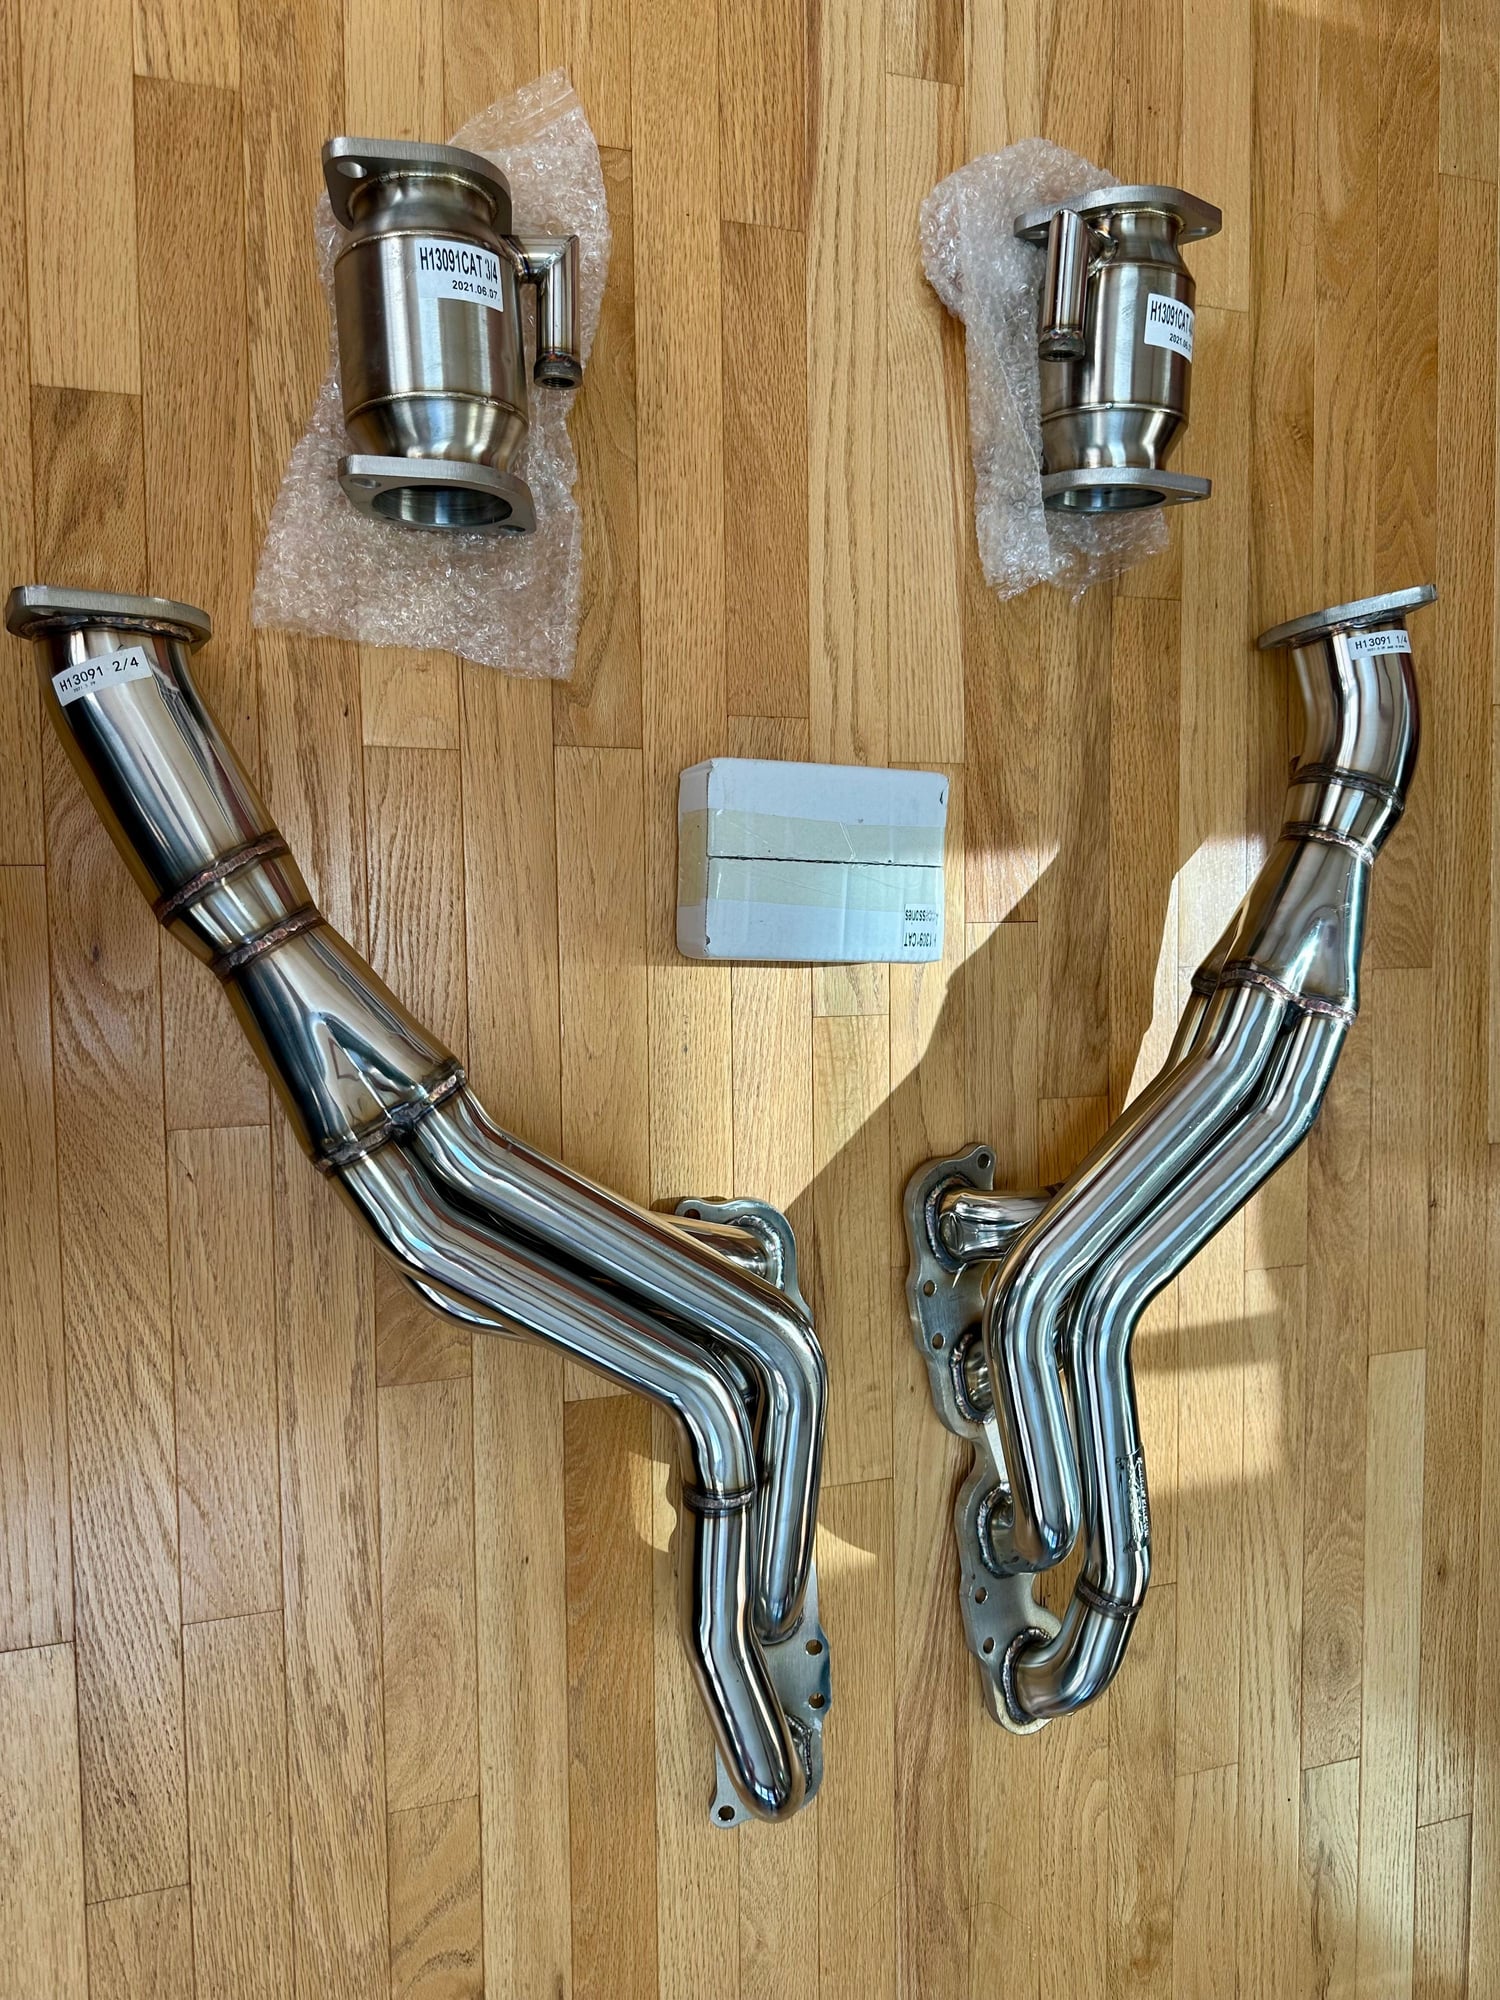 Engine - Exhaust - M156 LONG TUBE HEADERS NEW - New - 2007 to 2013 Mercedes-Benz C63 AMG - 2007 to 2011 Mercedes-Benz E63 AMG - 2007 to 2011 Mercedes-Benz CLS63 AMG - New Haven, CT 06513, United States